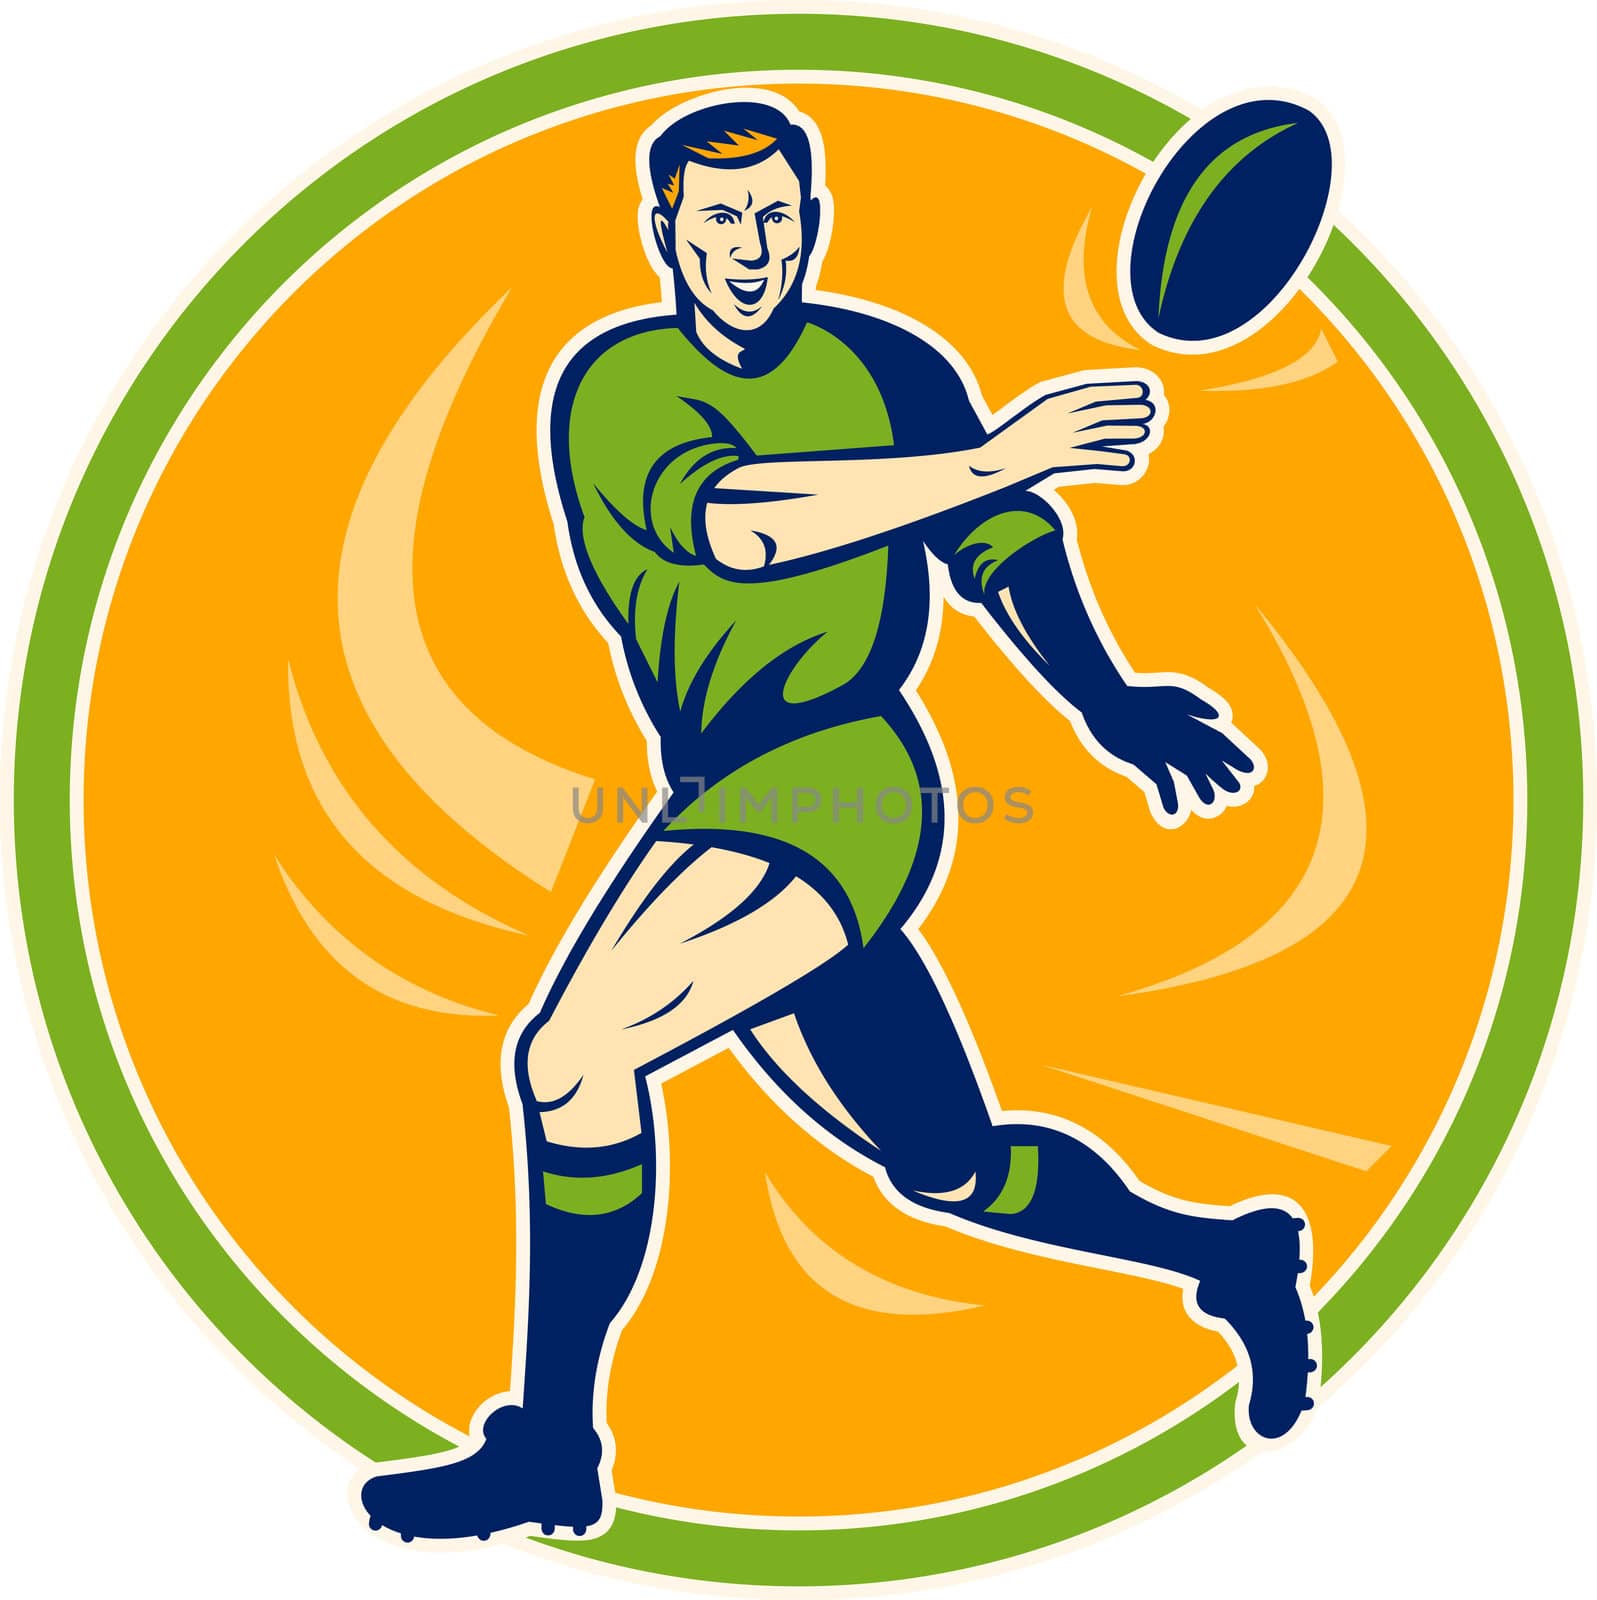 Rugby player running and passing ball by patrimonio